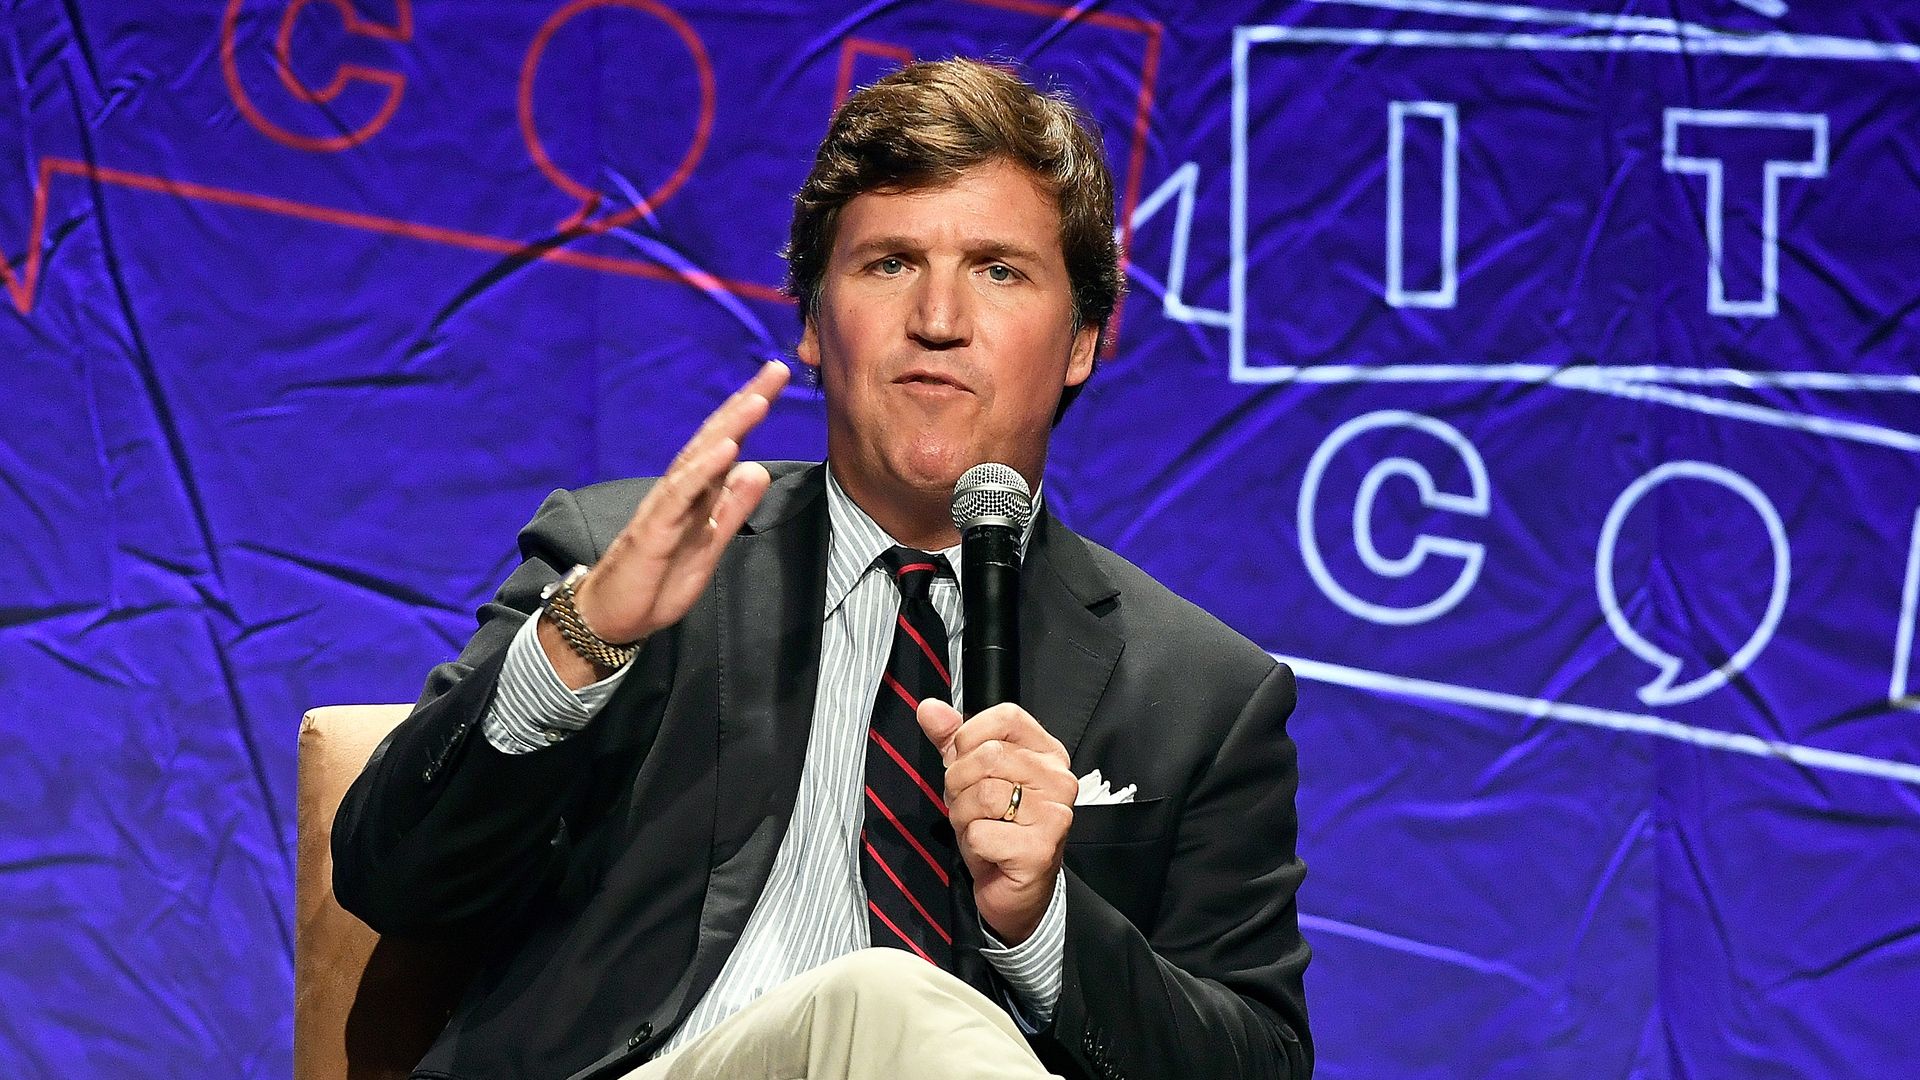 Fox News host Tucker Carlson defiantly responded to controversial audio of him that resurfaced this week.